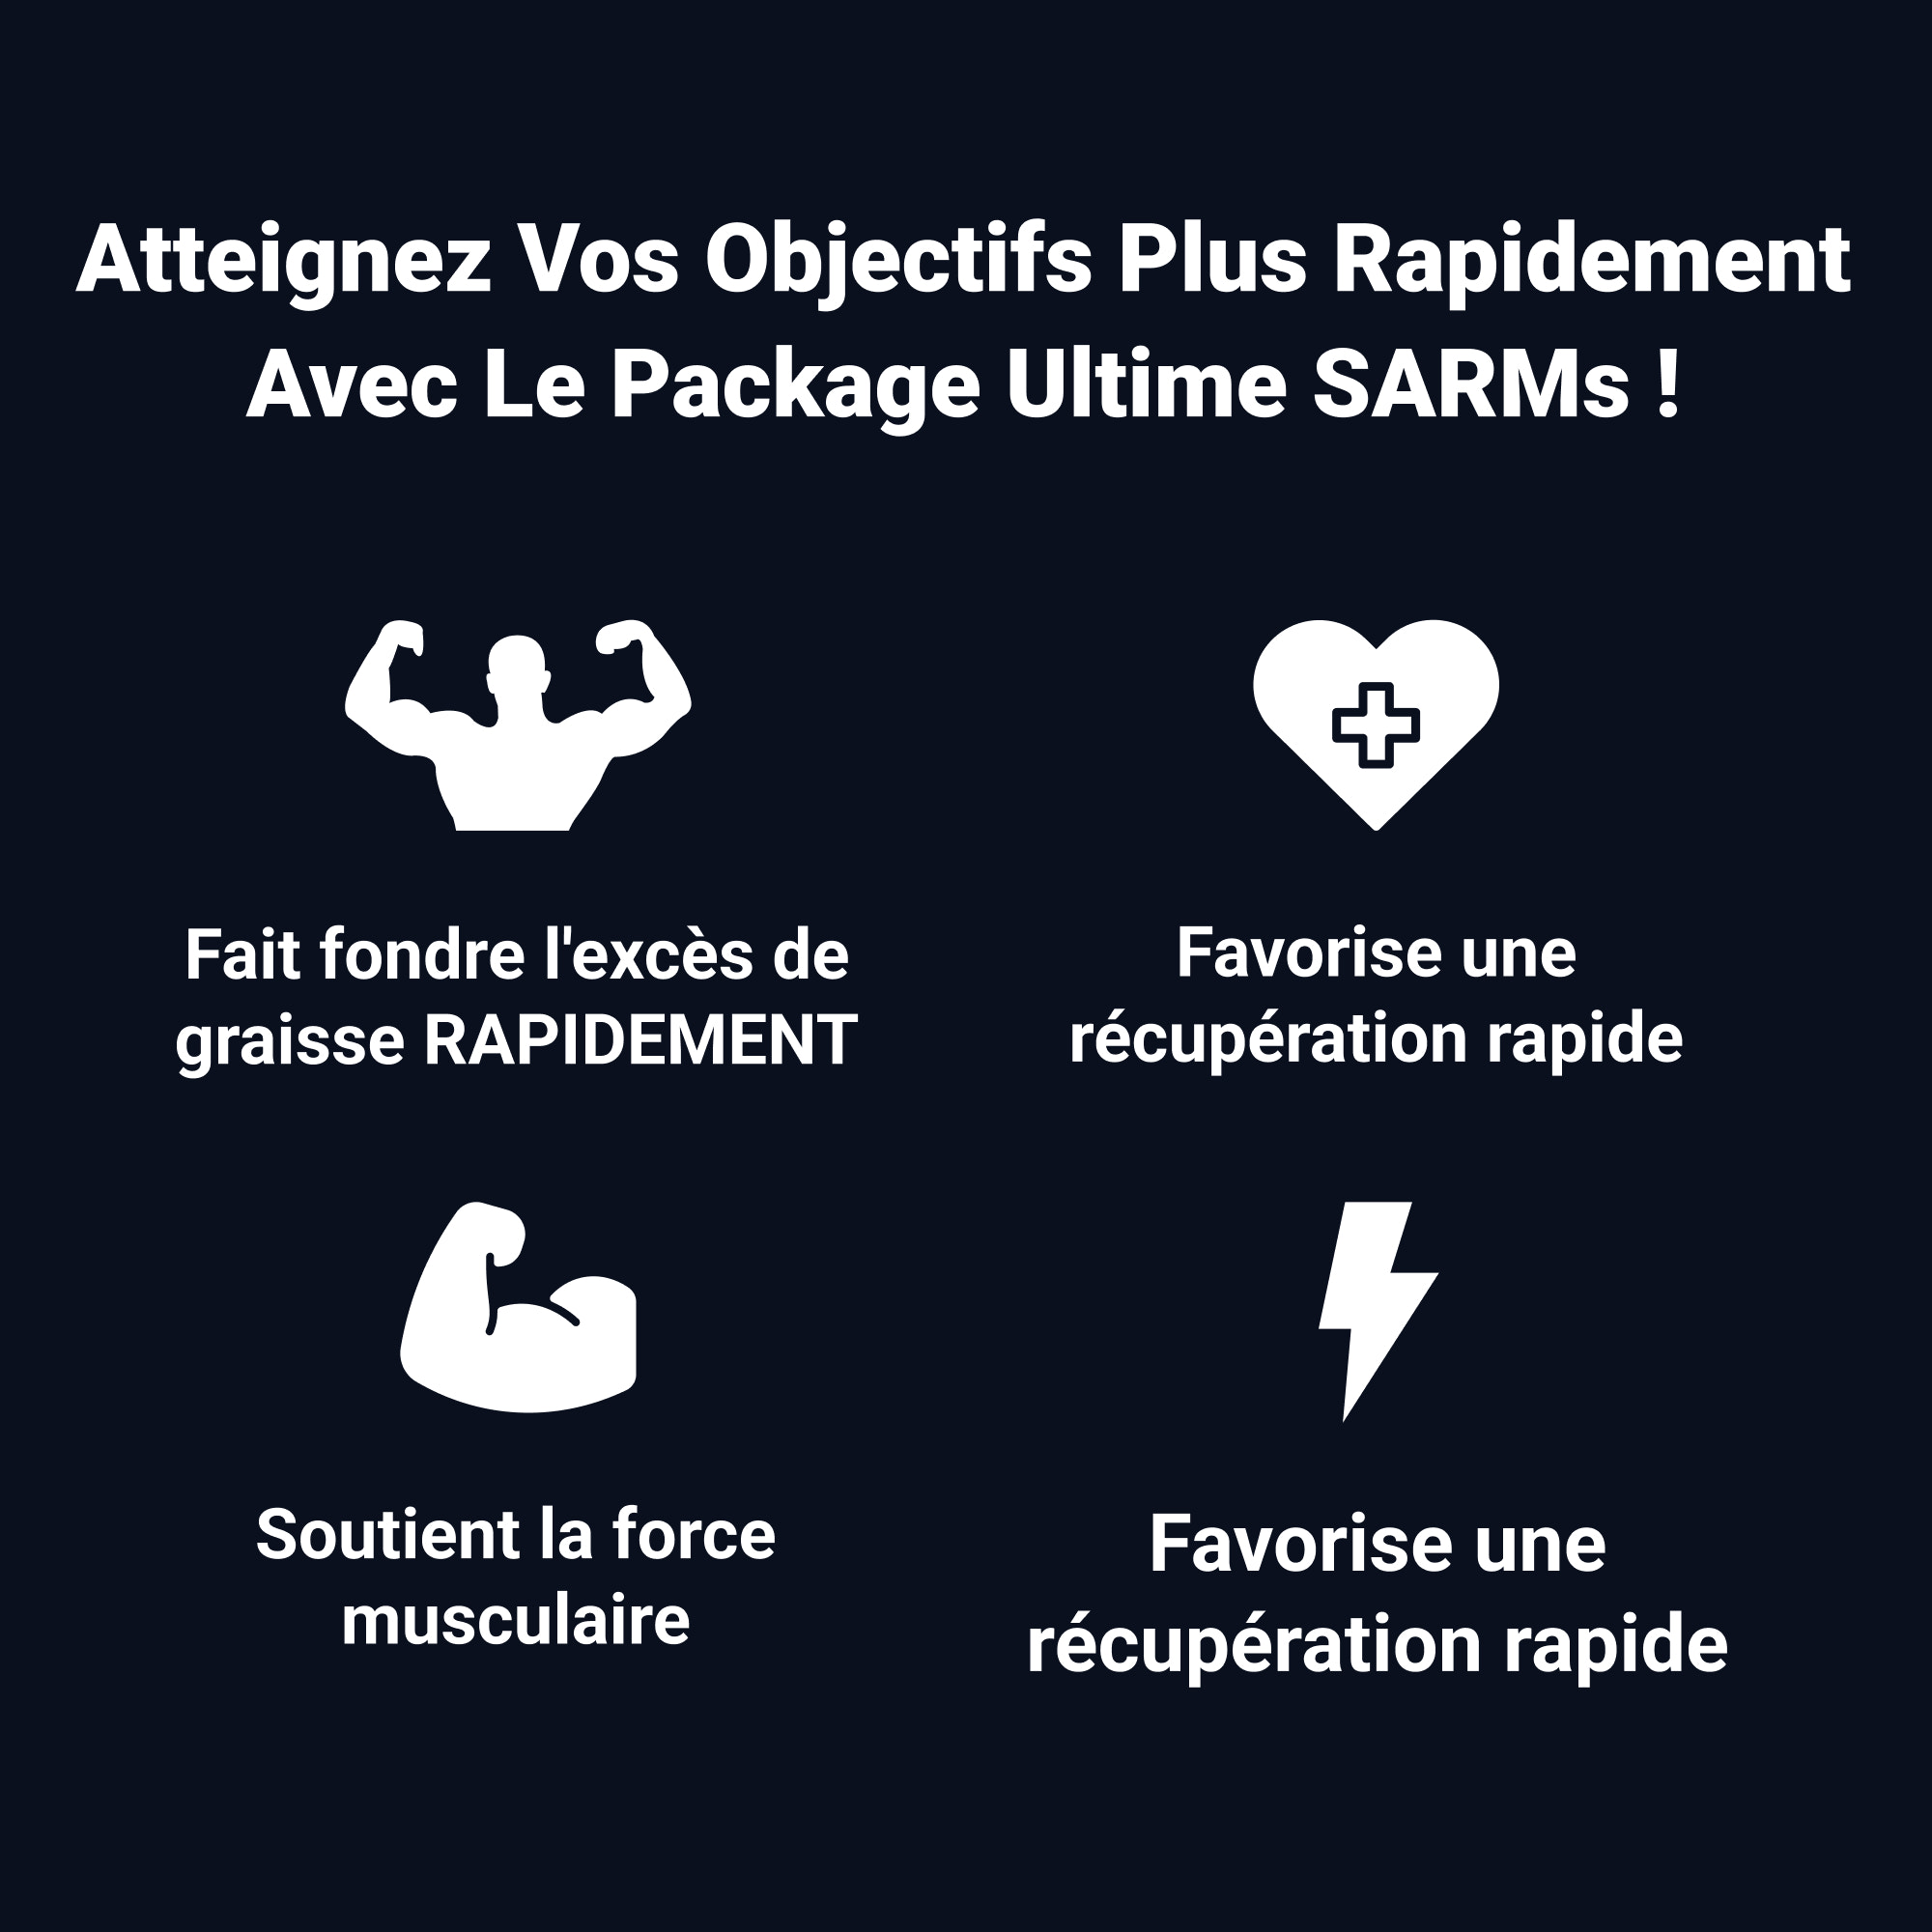 Package ultime SARMs